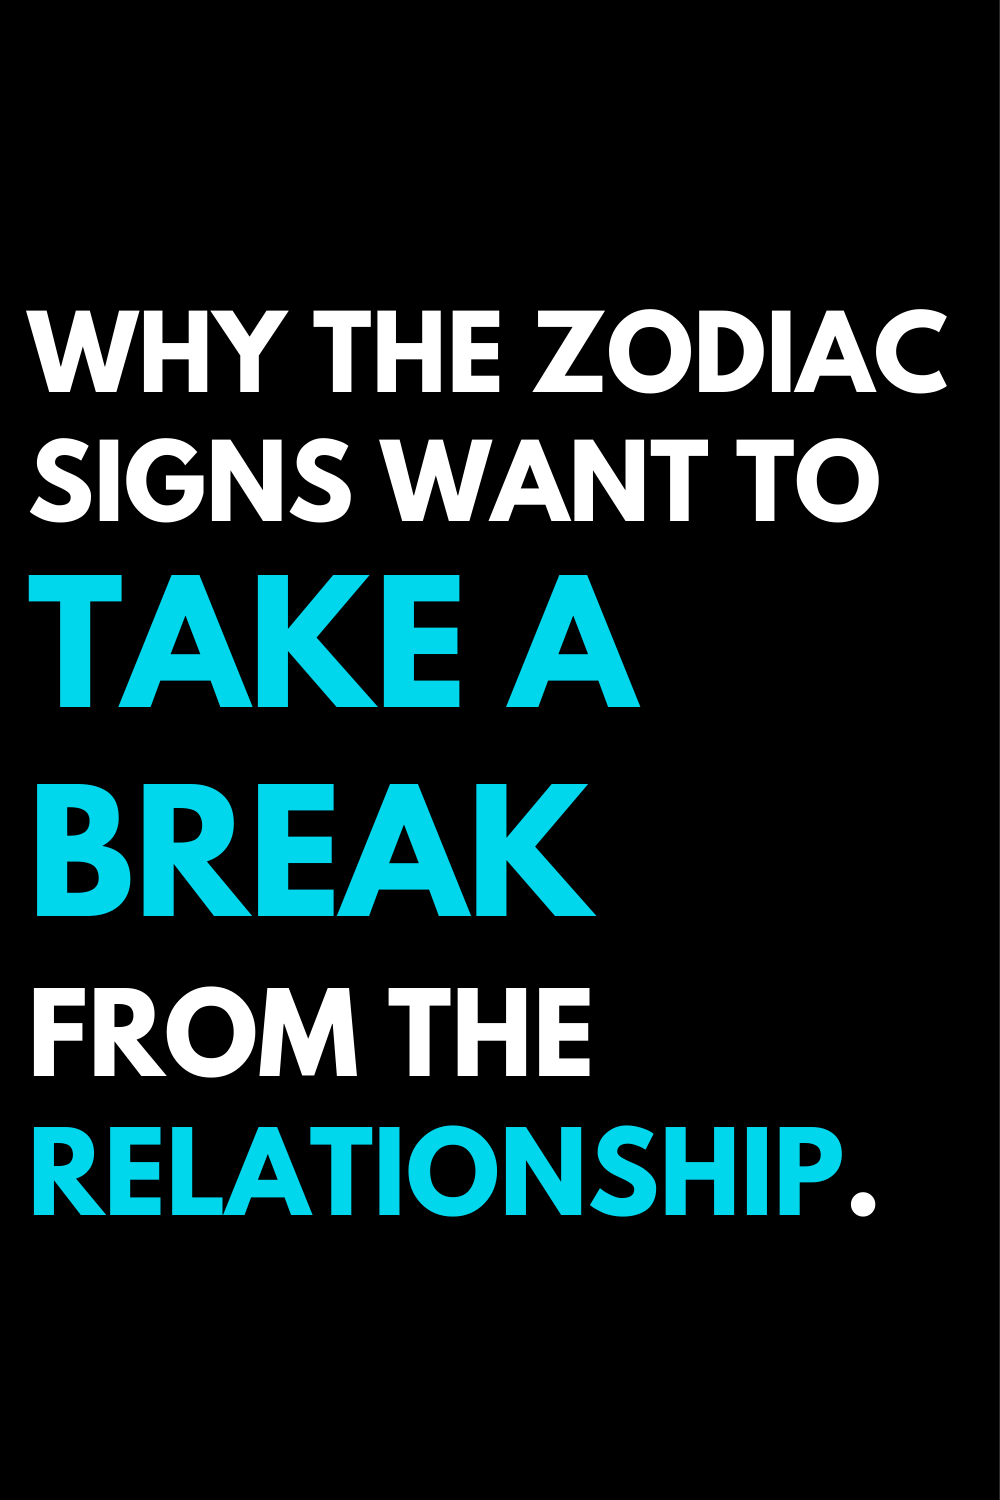 Why the zodiac signs want to take a break from the relationship.